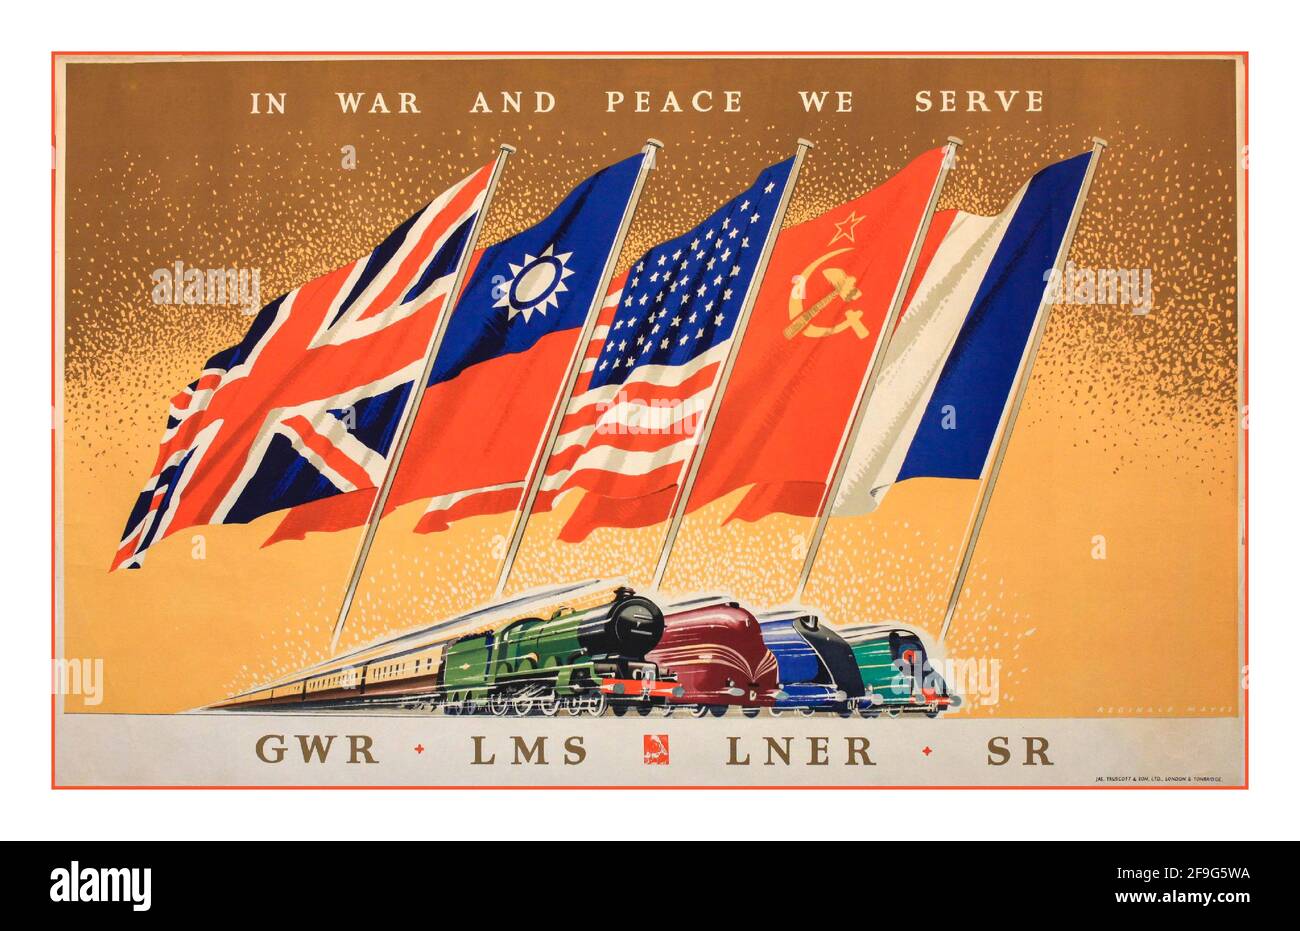 Vintage Post War 1940’s Railway Train Travel Poster  'In War And Peace We Serve',  poster printed for GWR LMS LNER SR by Truscott circa 1946 by Reginald Mayes Illustration of WW2 Allied Flags and Locomotives of the UK regional rail services Stock Photo